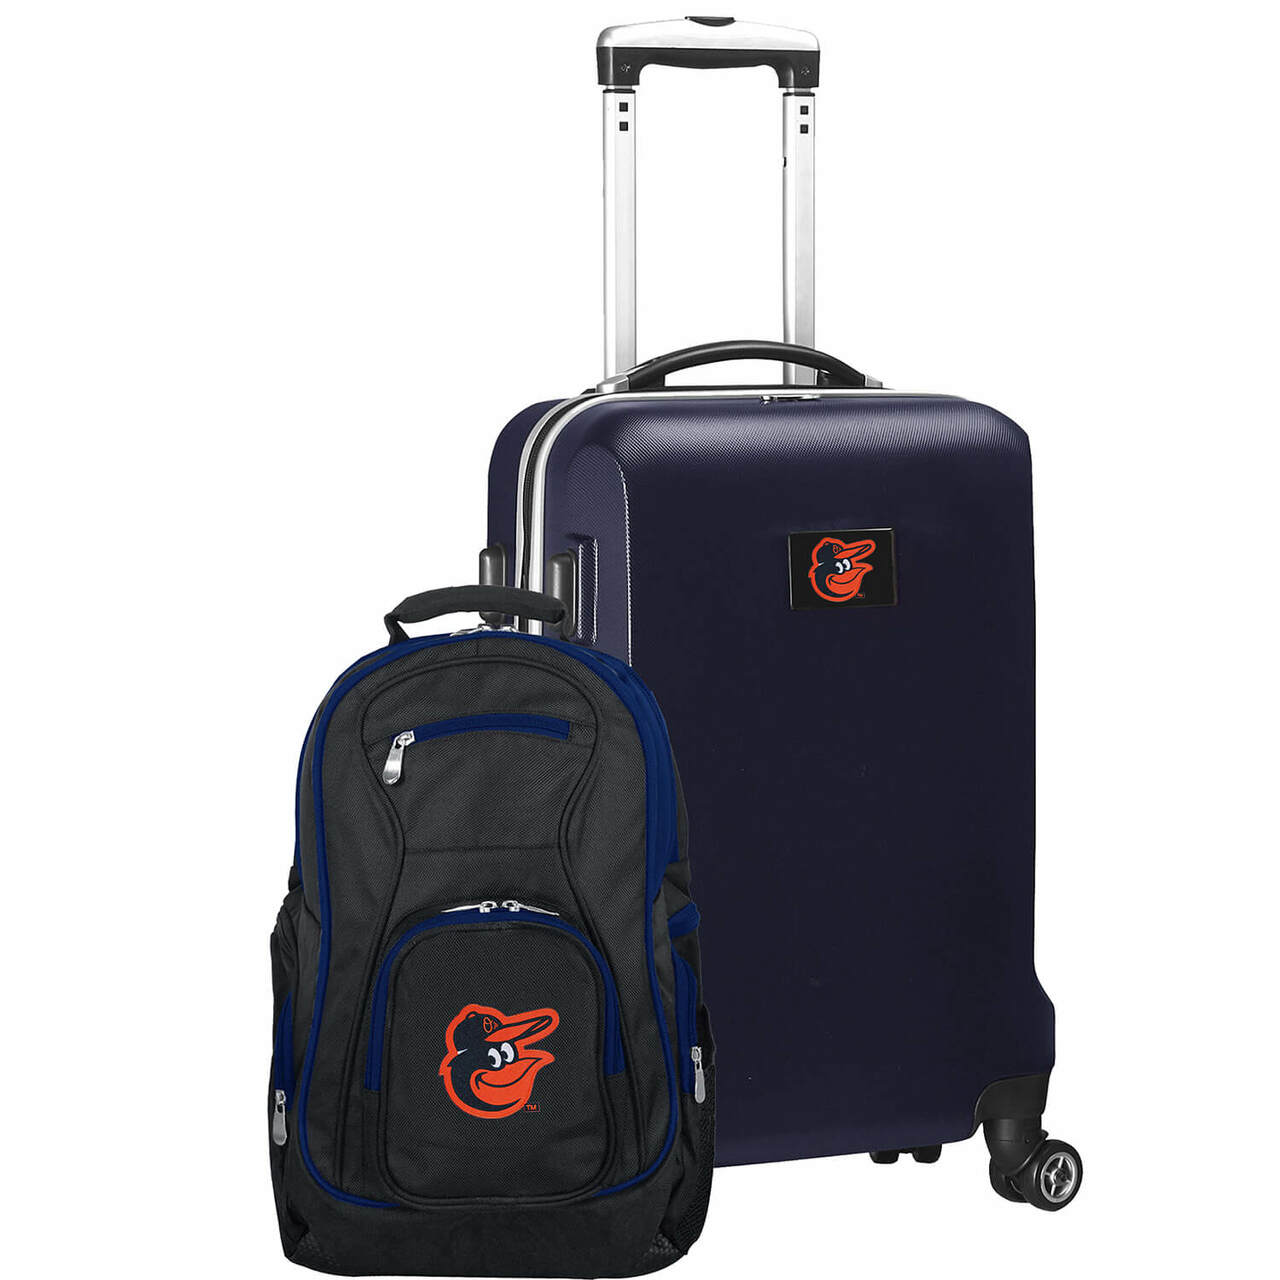 Baltimore Orioles Deluxe 2-Piece Backpack and Carry on Set in Navy